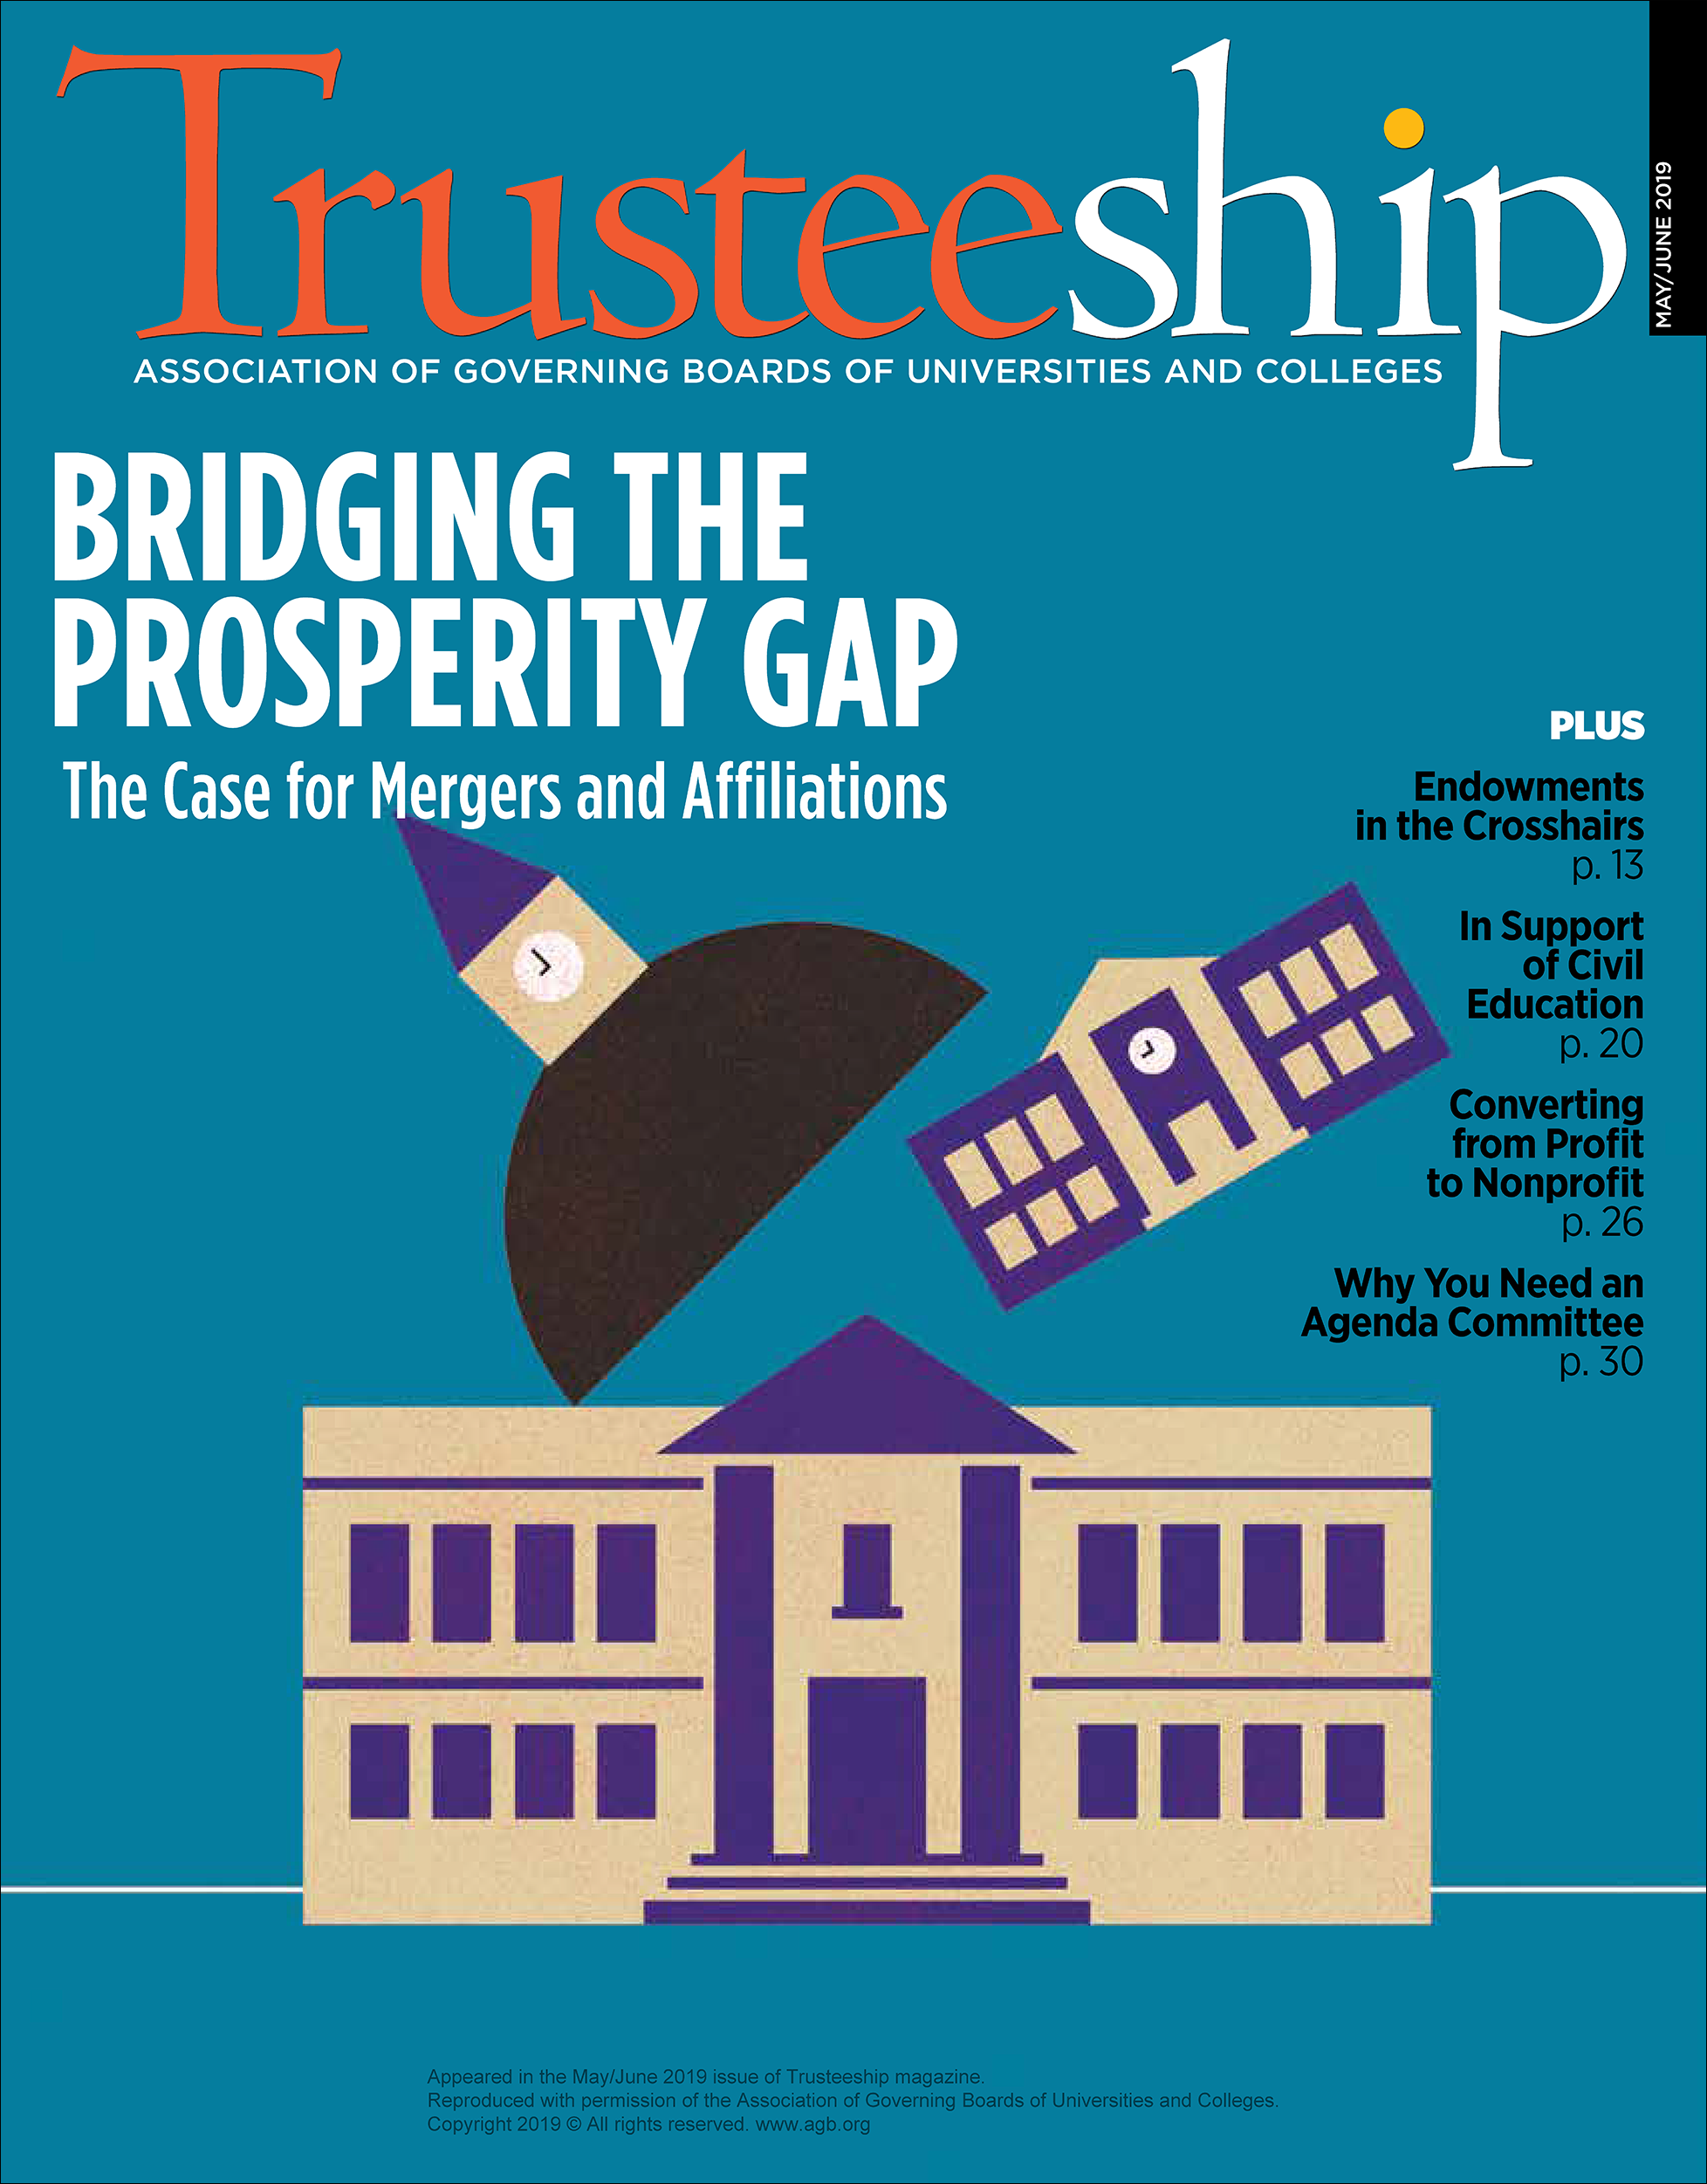 AGB Trusteeship Magazine: May/June 2019, with cover article "Bridging the Prosperity Gap - The Case for Mergers and Affiliations"